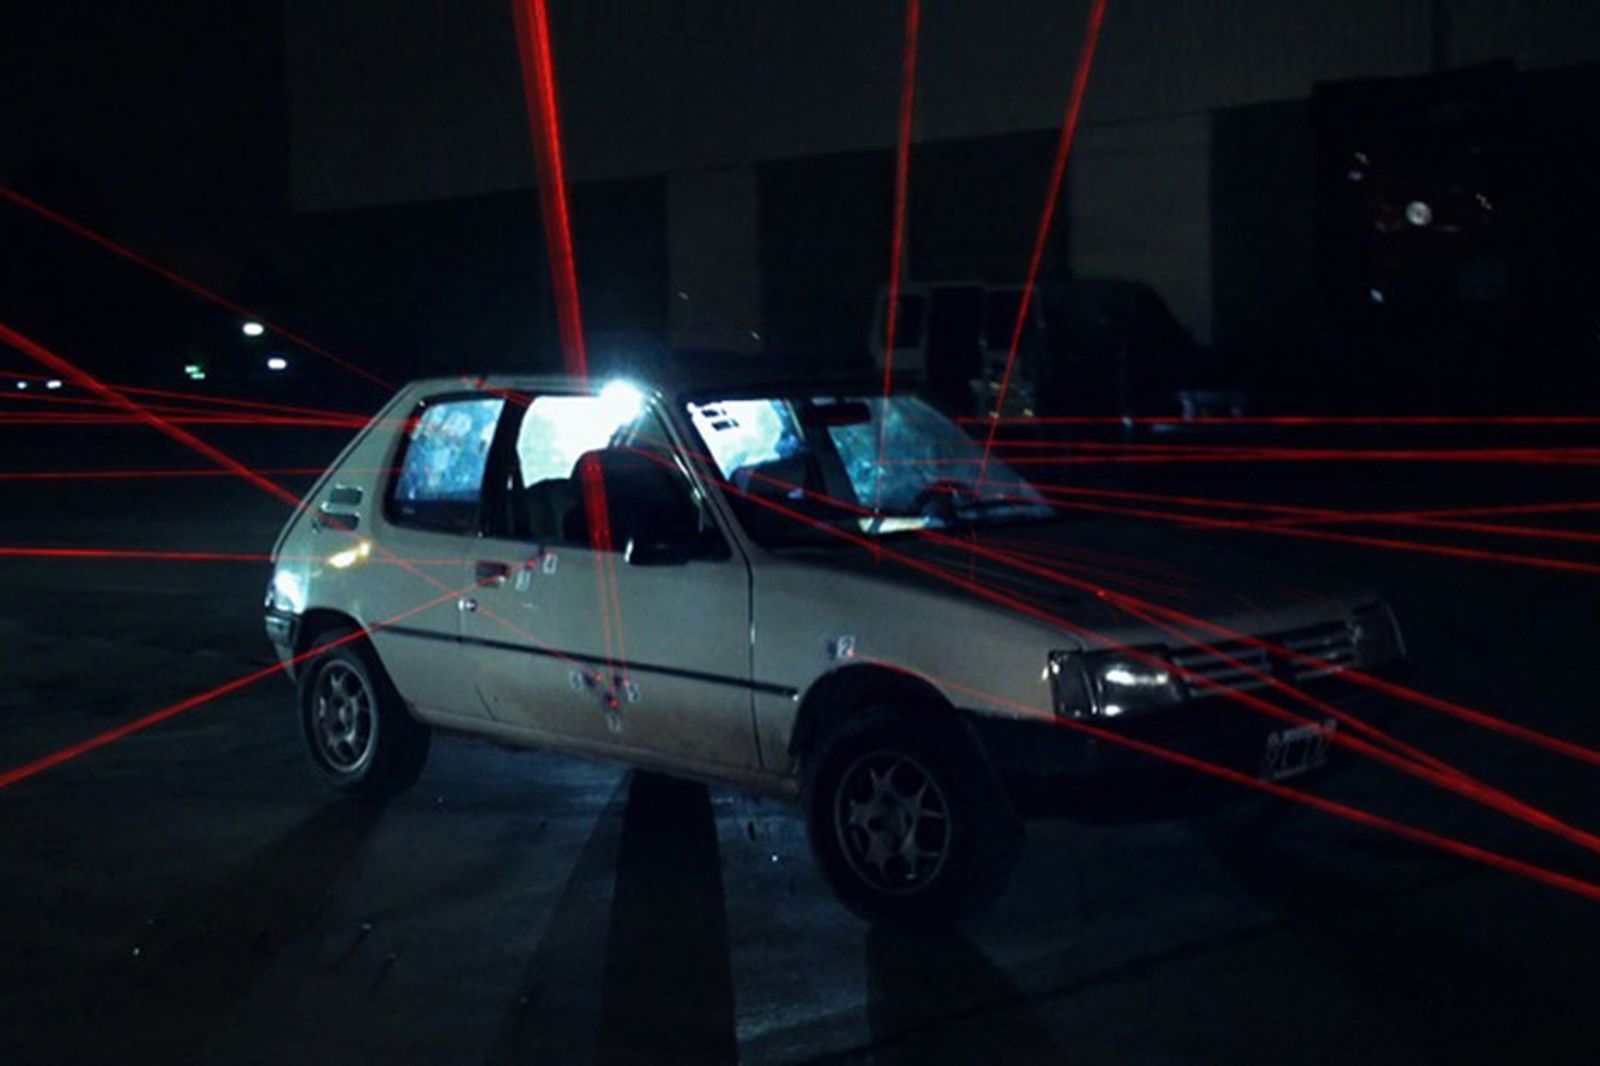 © Myriam Meloni - The car of Fernando Carrera drilled by 18 gunshots. Frame from the documentary The Rati Horror Show,